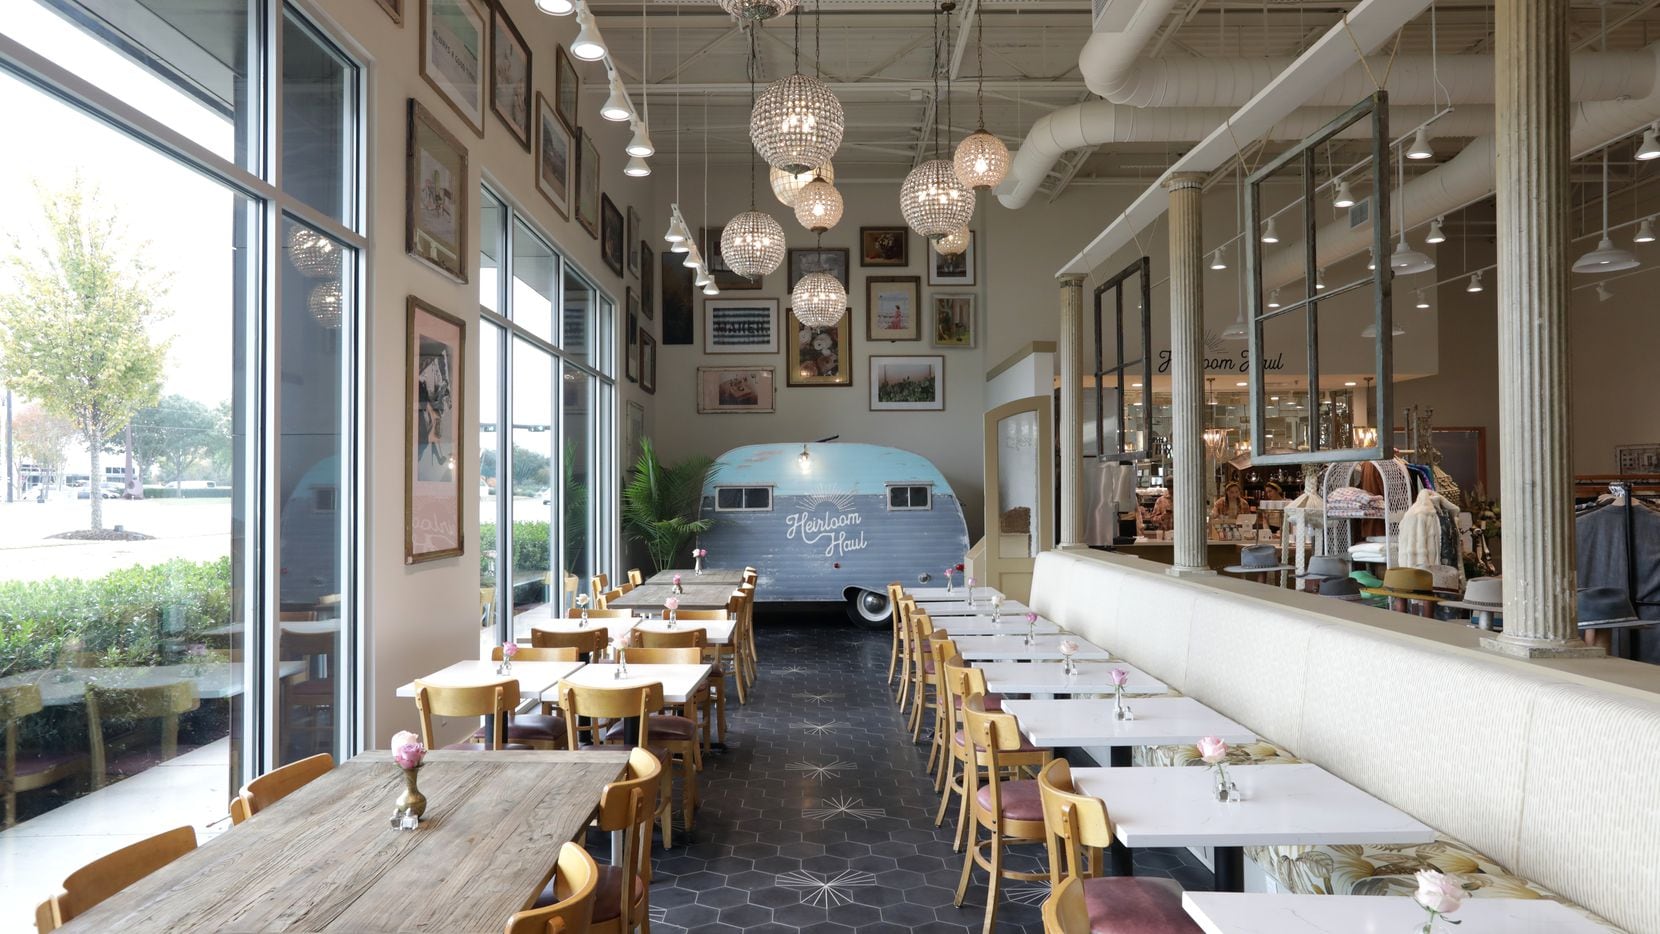 The Flea Style empire expands to house a fastcasual restaurant at the